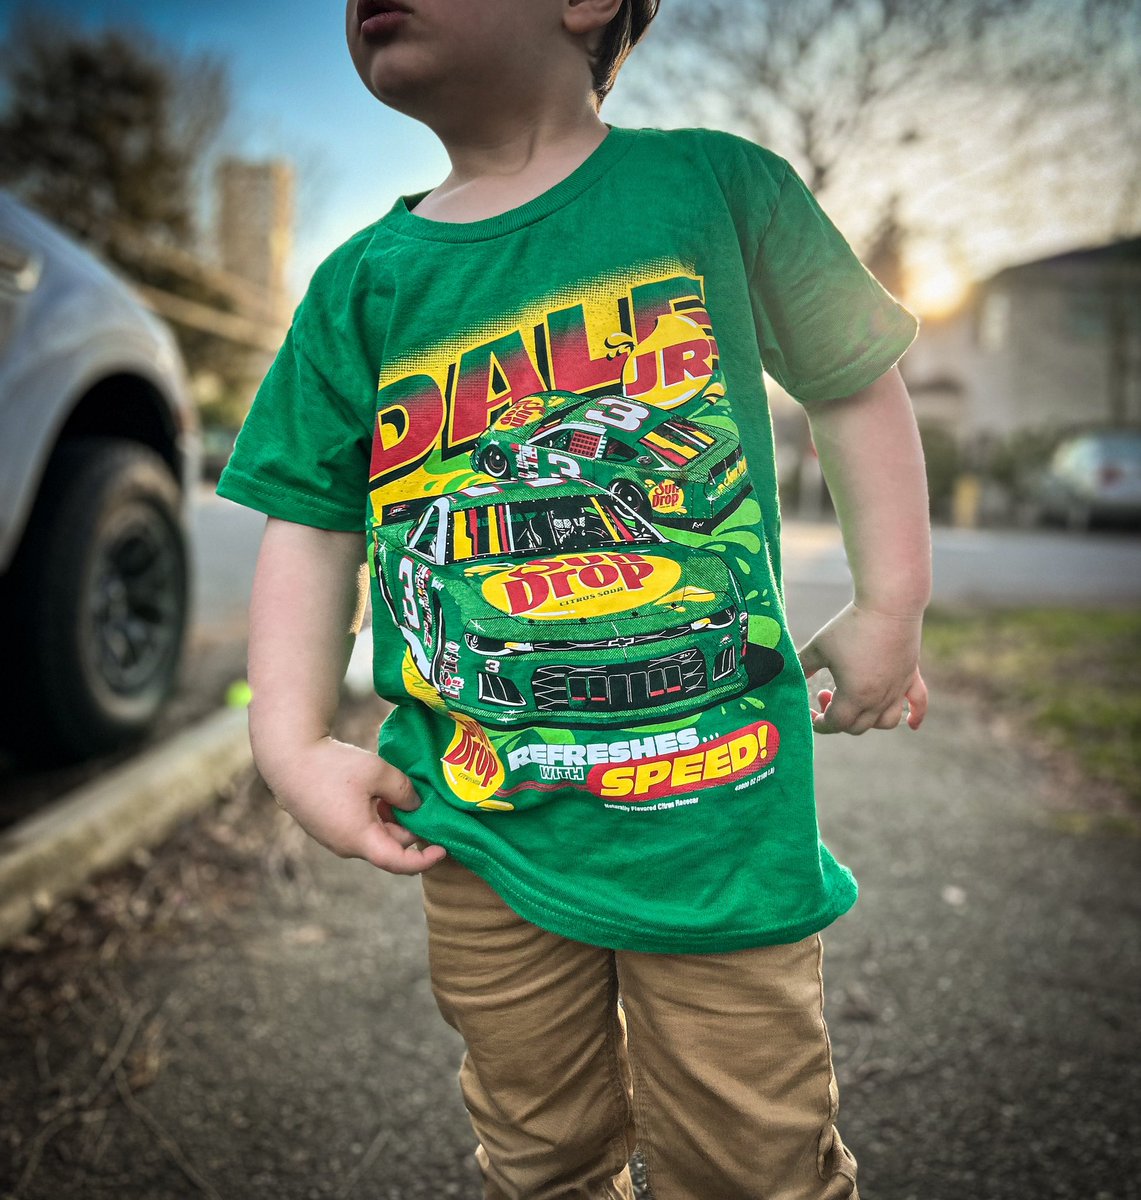 My 3 year old son’s choice for school free dress StPattysDay is the @DaleJr @SunDrop shirt by @RyanW_Design A very rare sighting in Seattle.